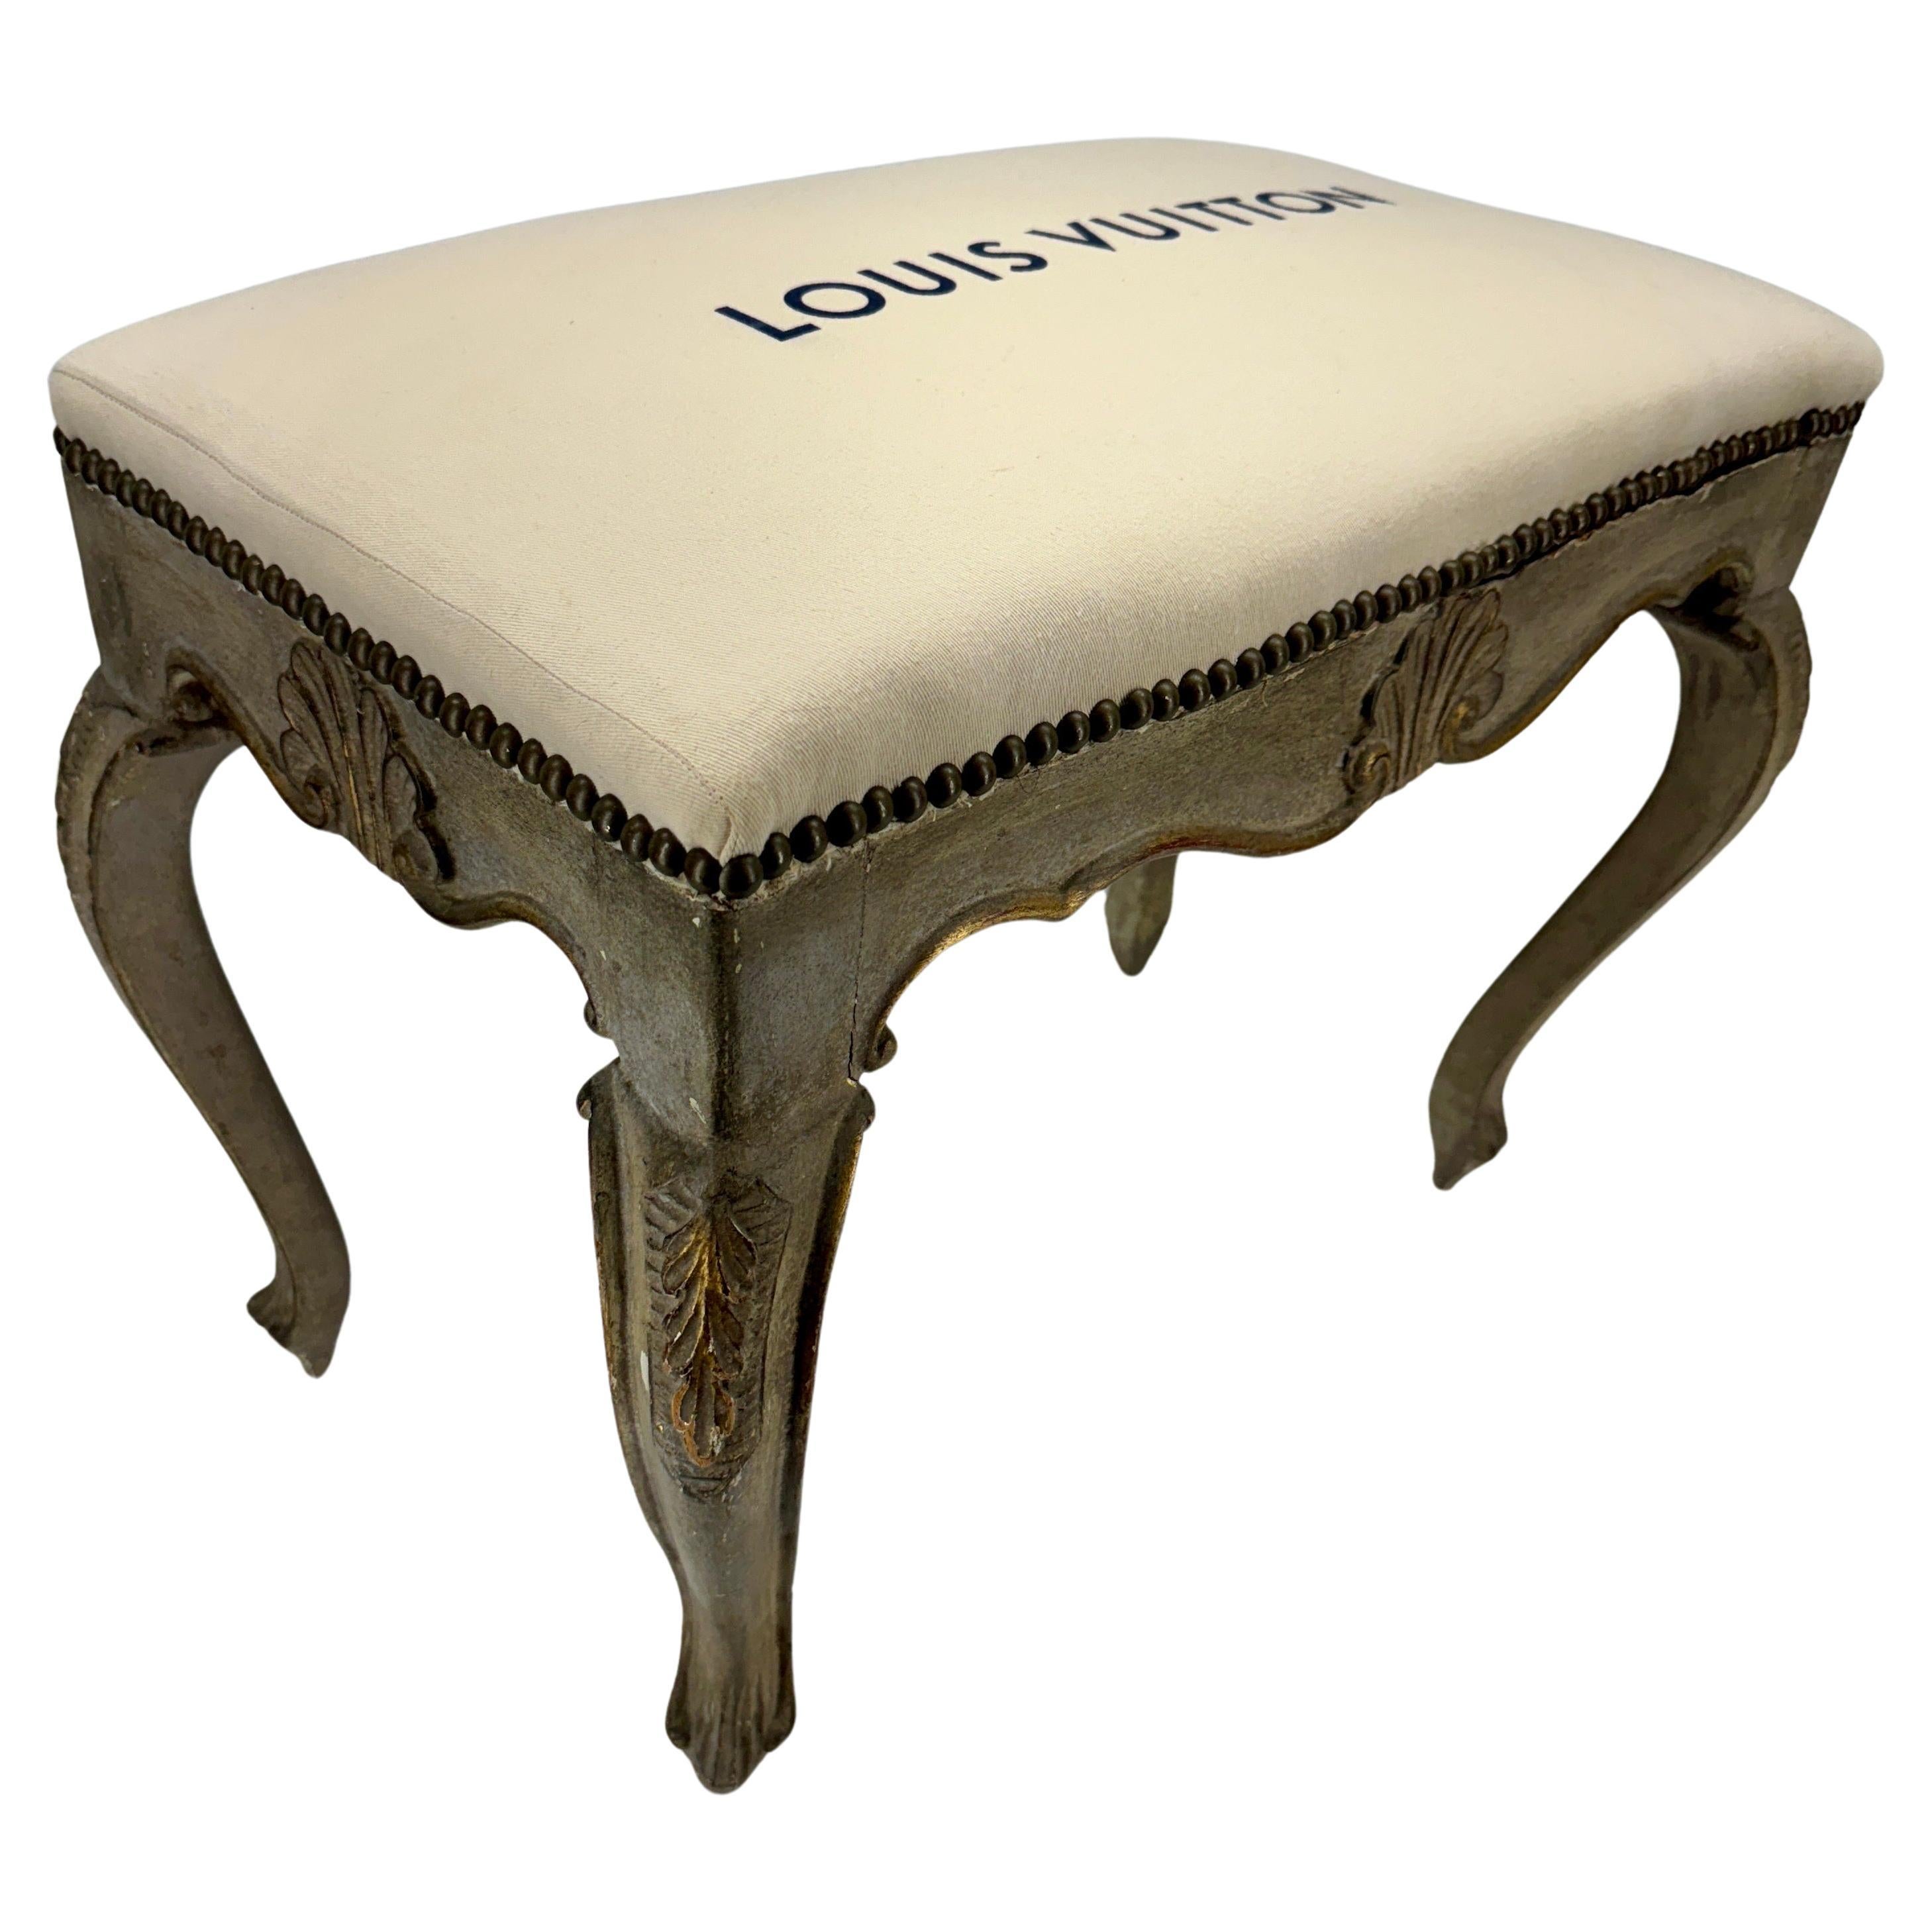 French Rococo style Louis Vuitton upholstered bench with carved rocaille woodwork and Louis Vuitton printed on the upholstered seat. Certainly a statement piece in any formal or informal home living room or bedroom.